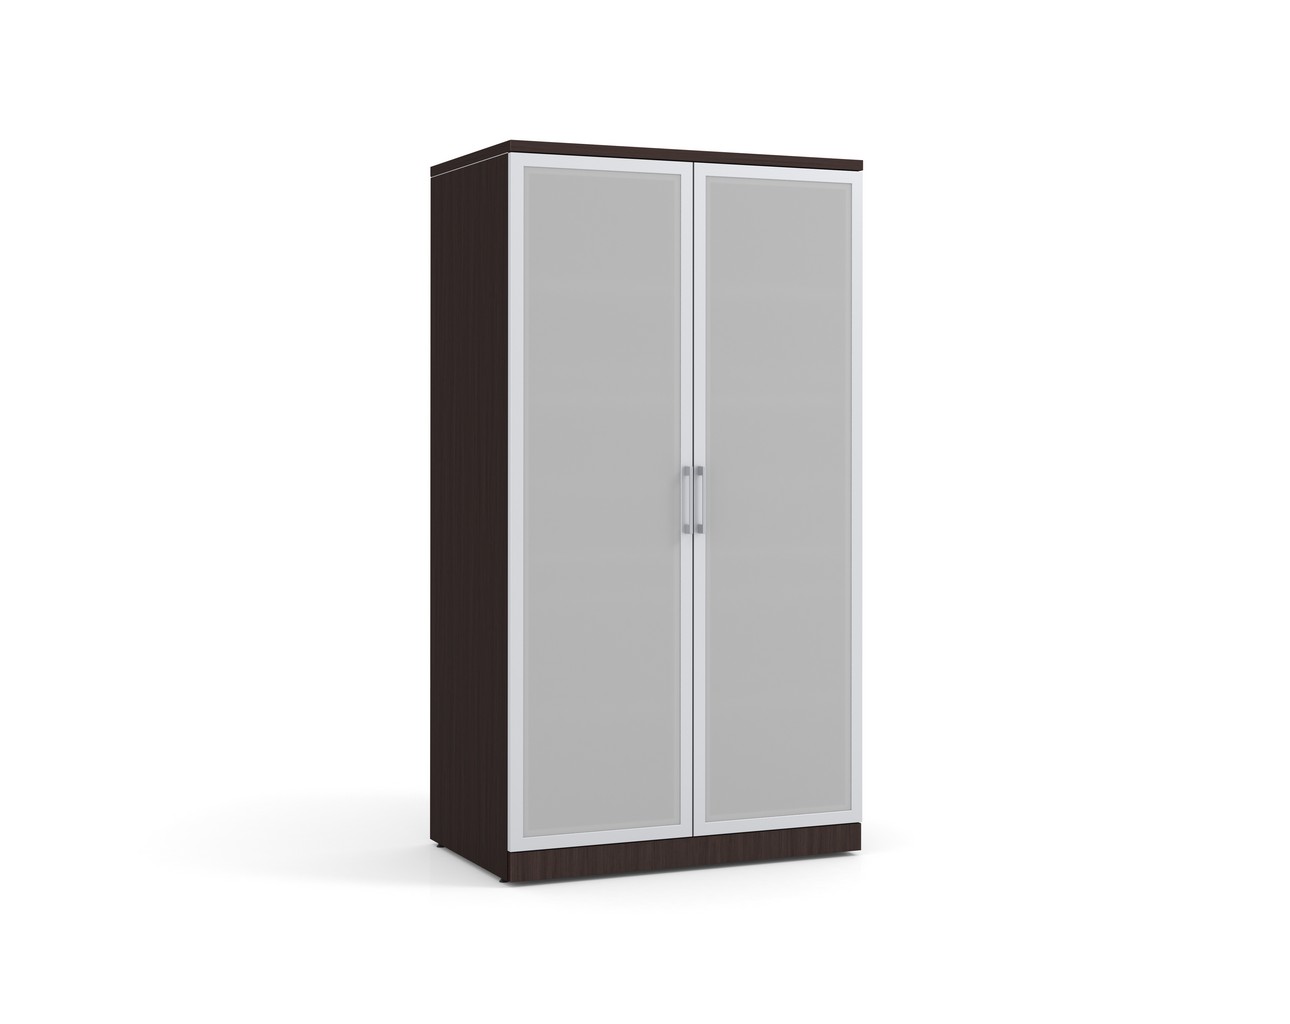 Glass Double Door Storage Cabinet 65 Inch with Espresso Finish